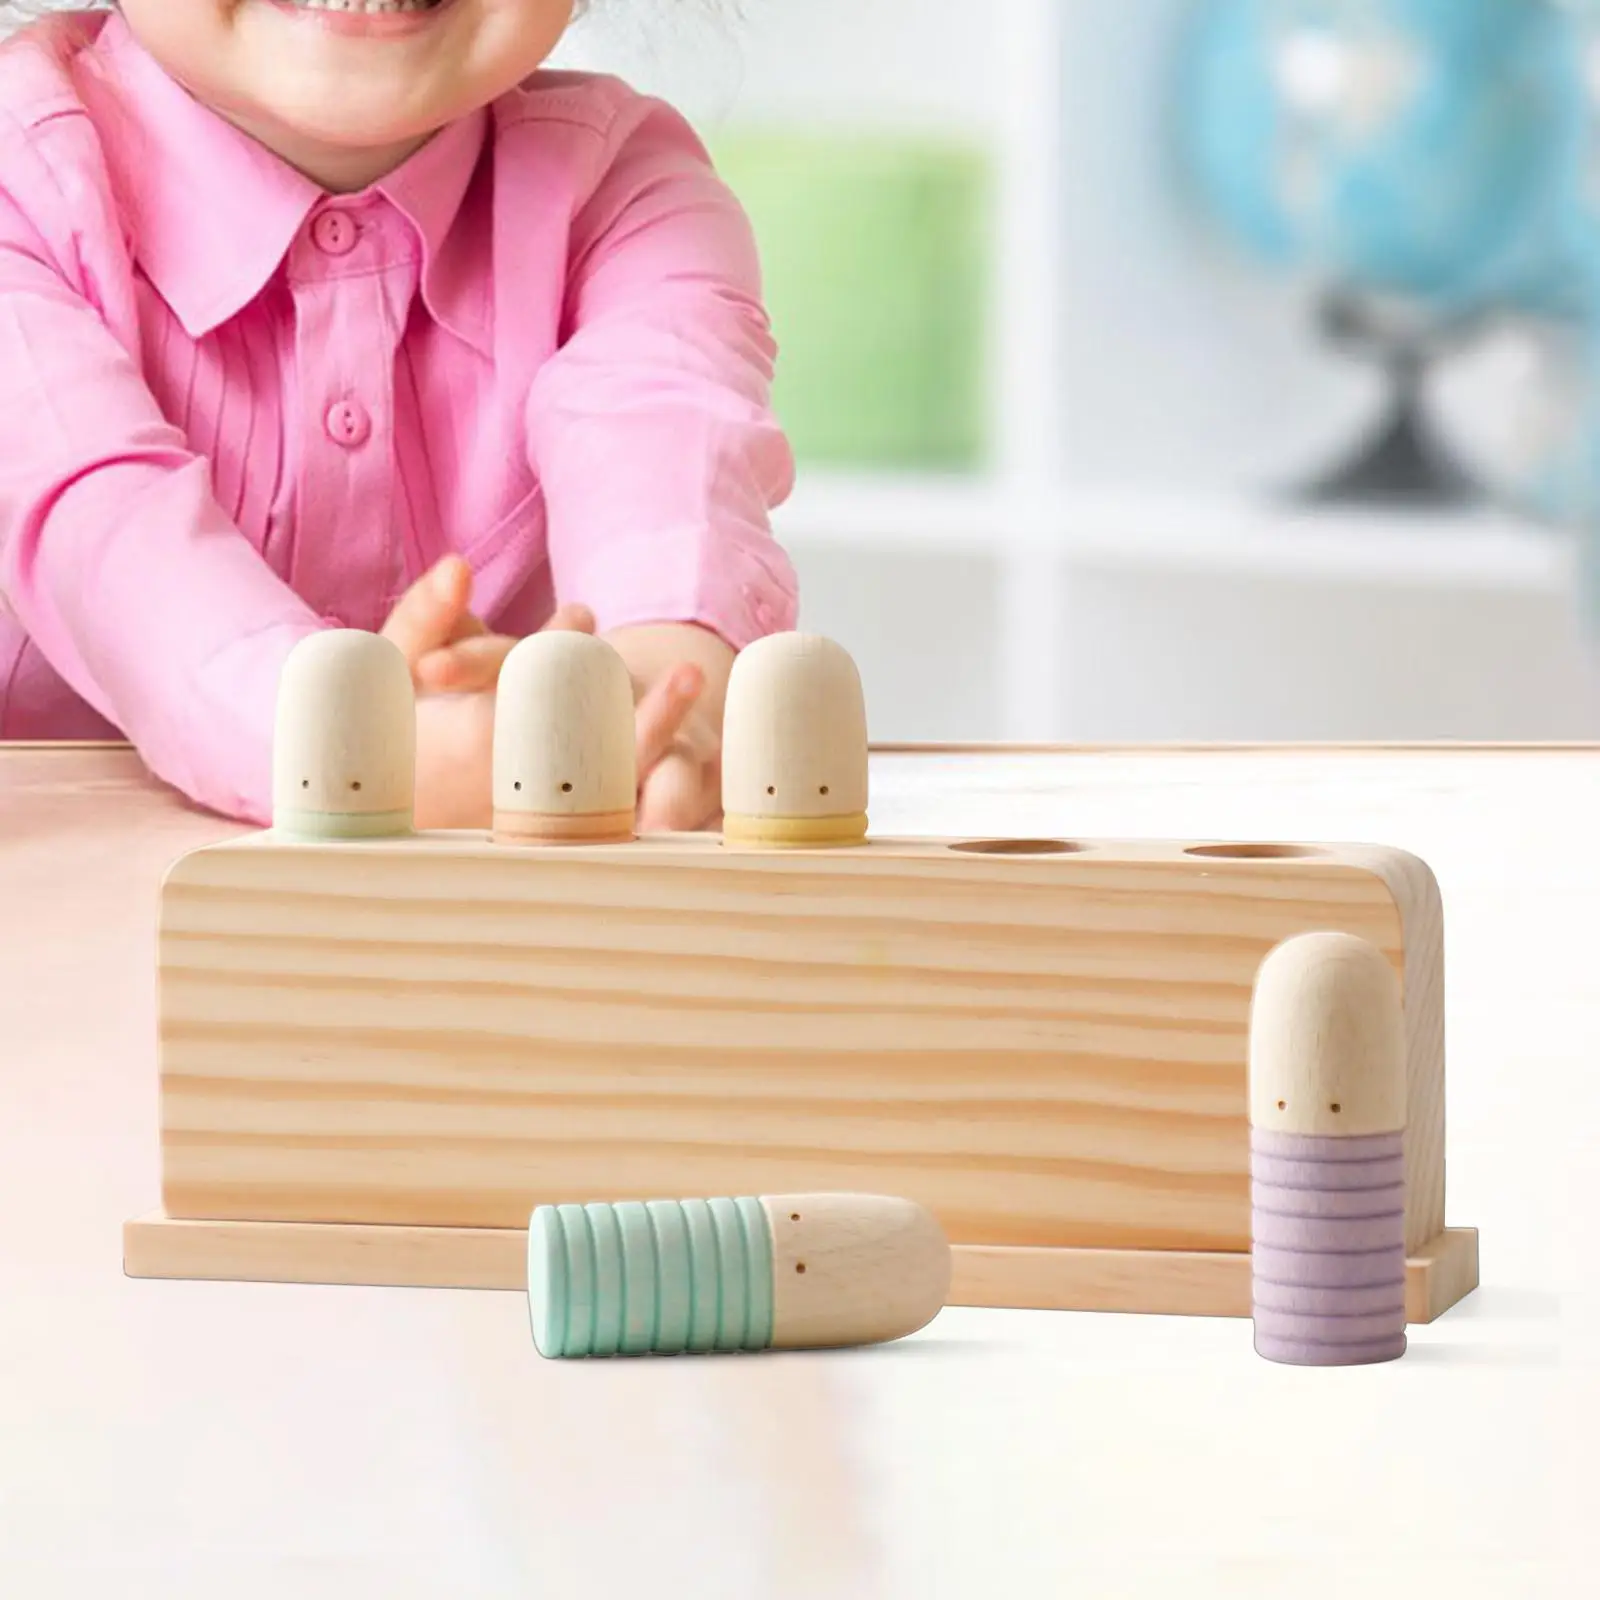 5 Wood People Figures Cylinder Blocks Bounce Game Preschool Learning Wooden Rainbow Peg Dolls Shapes Sorting Toys for Girls Boys